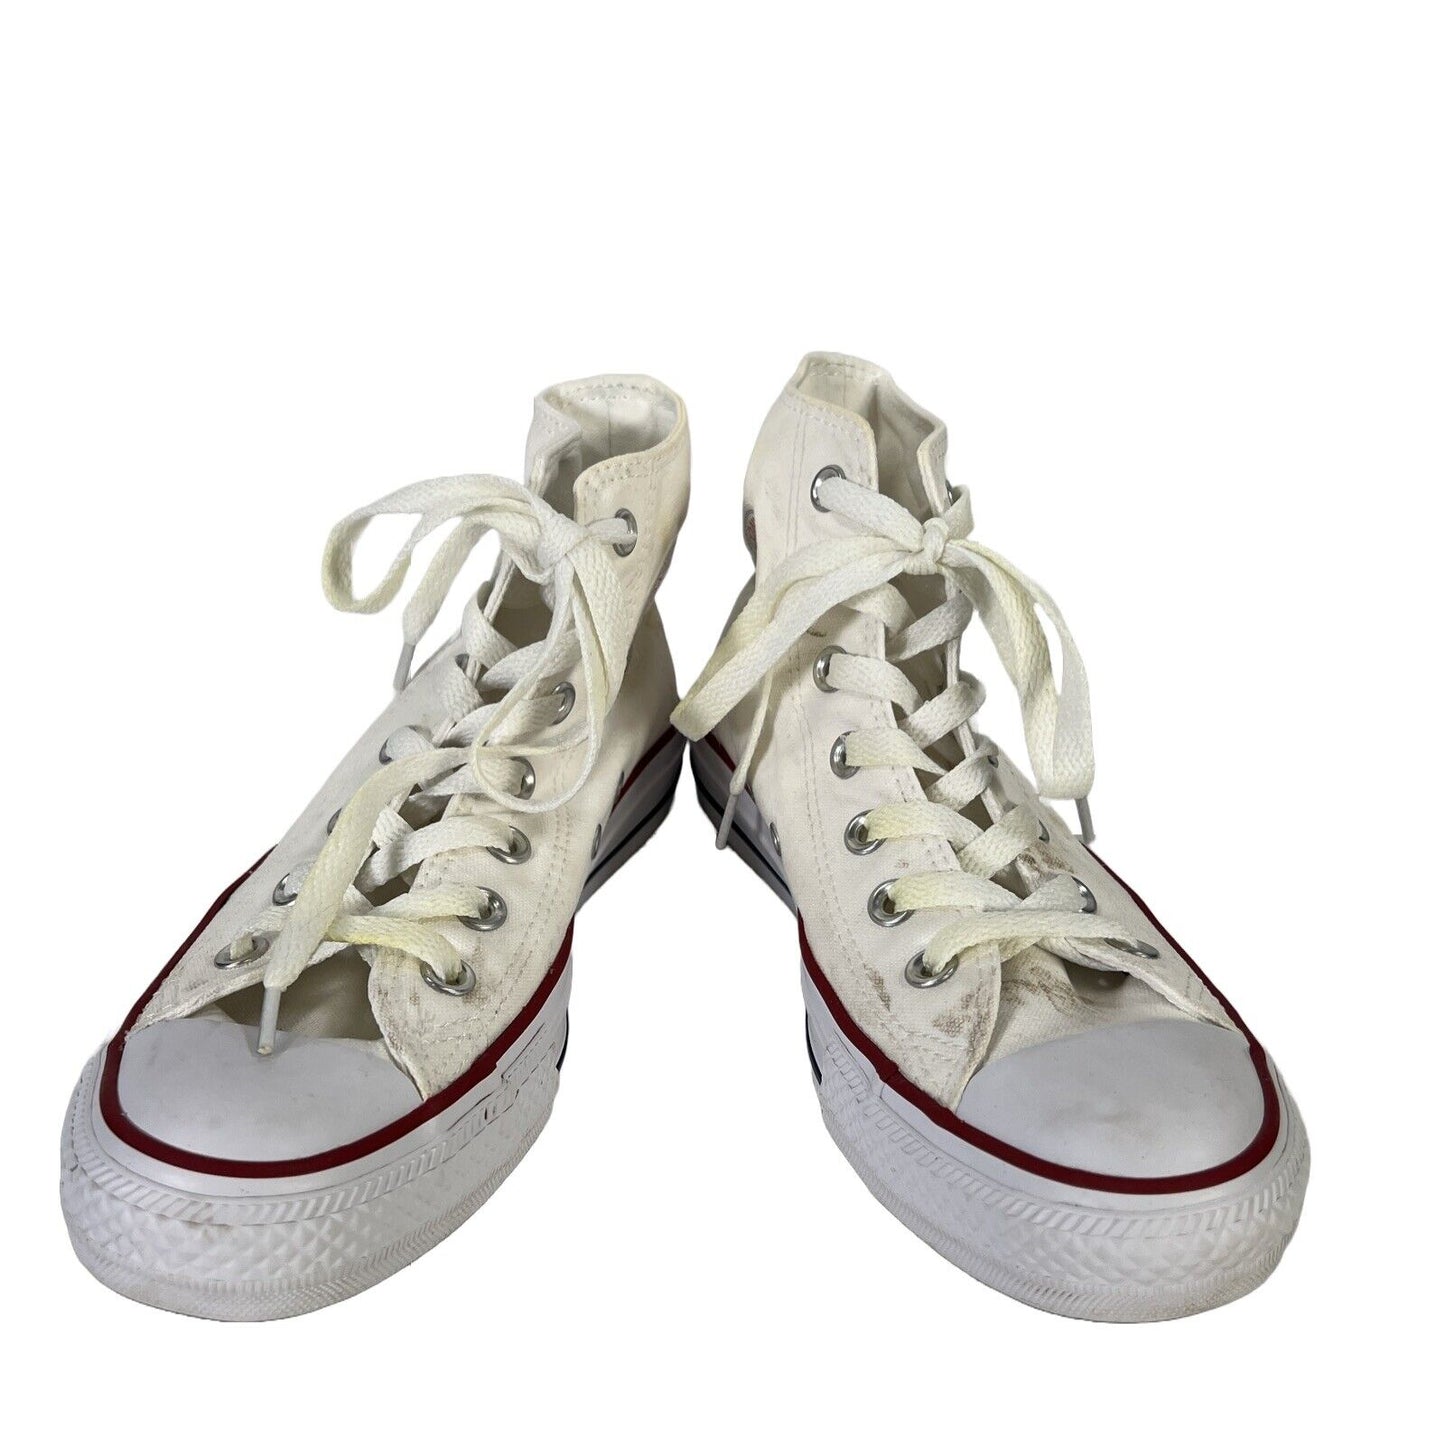 Converse Women's White Lace Up Canvas High Top Sneakers - 6.5